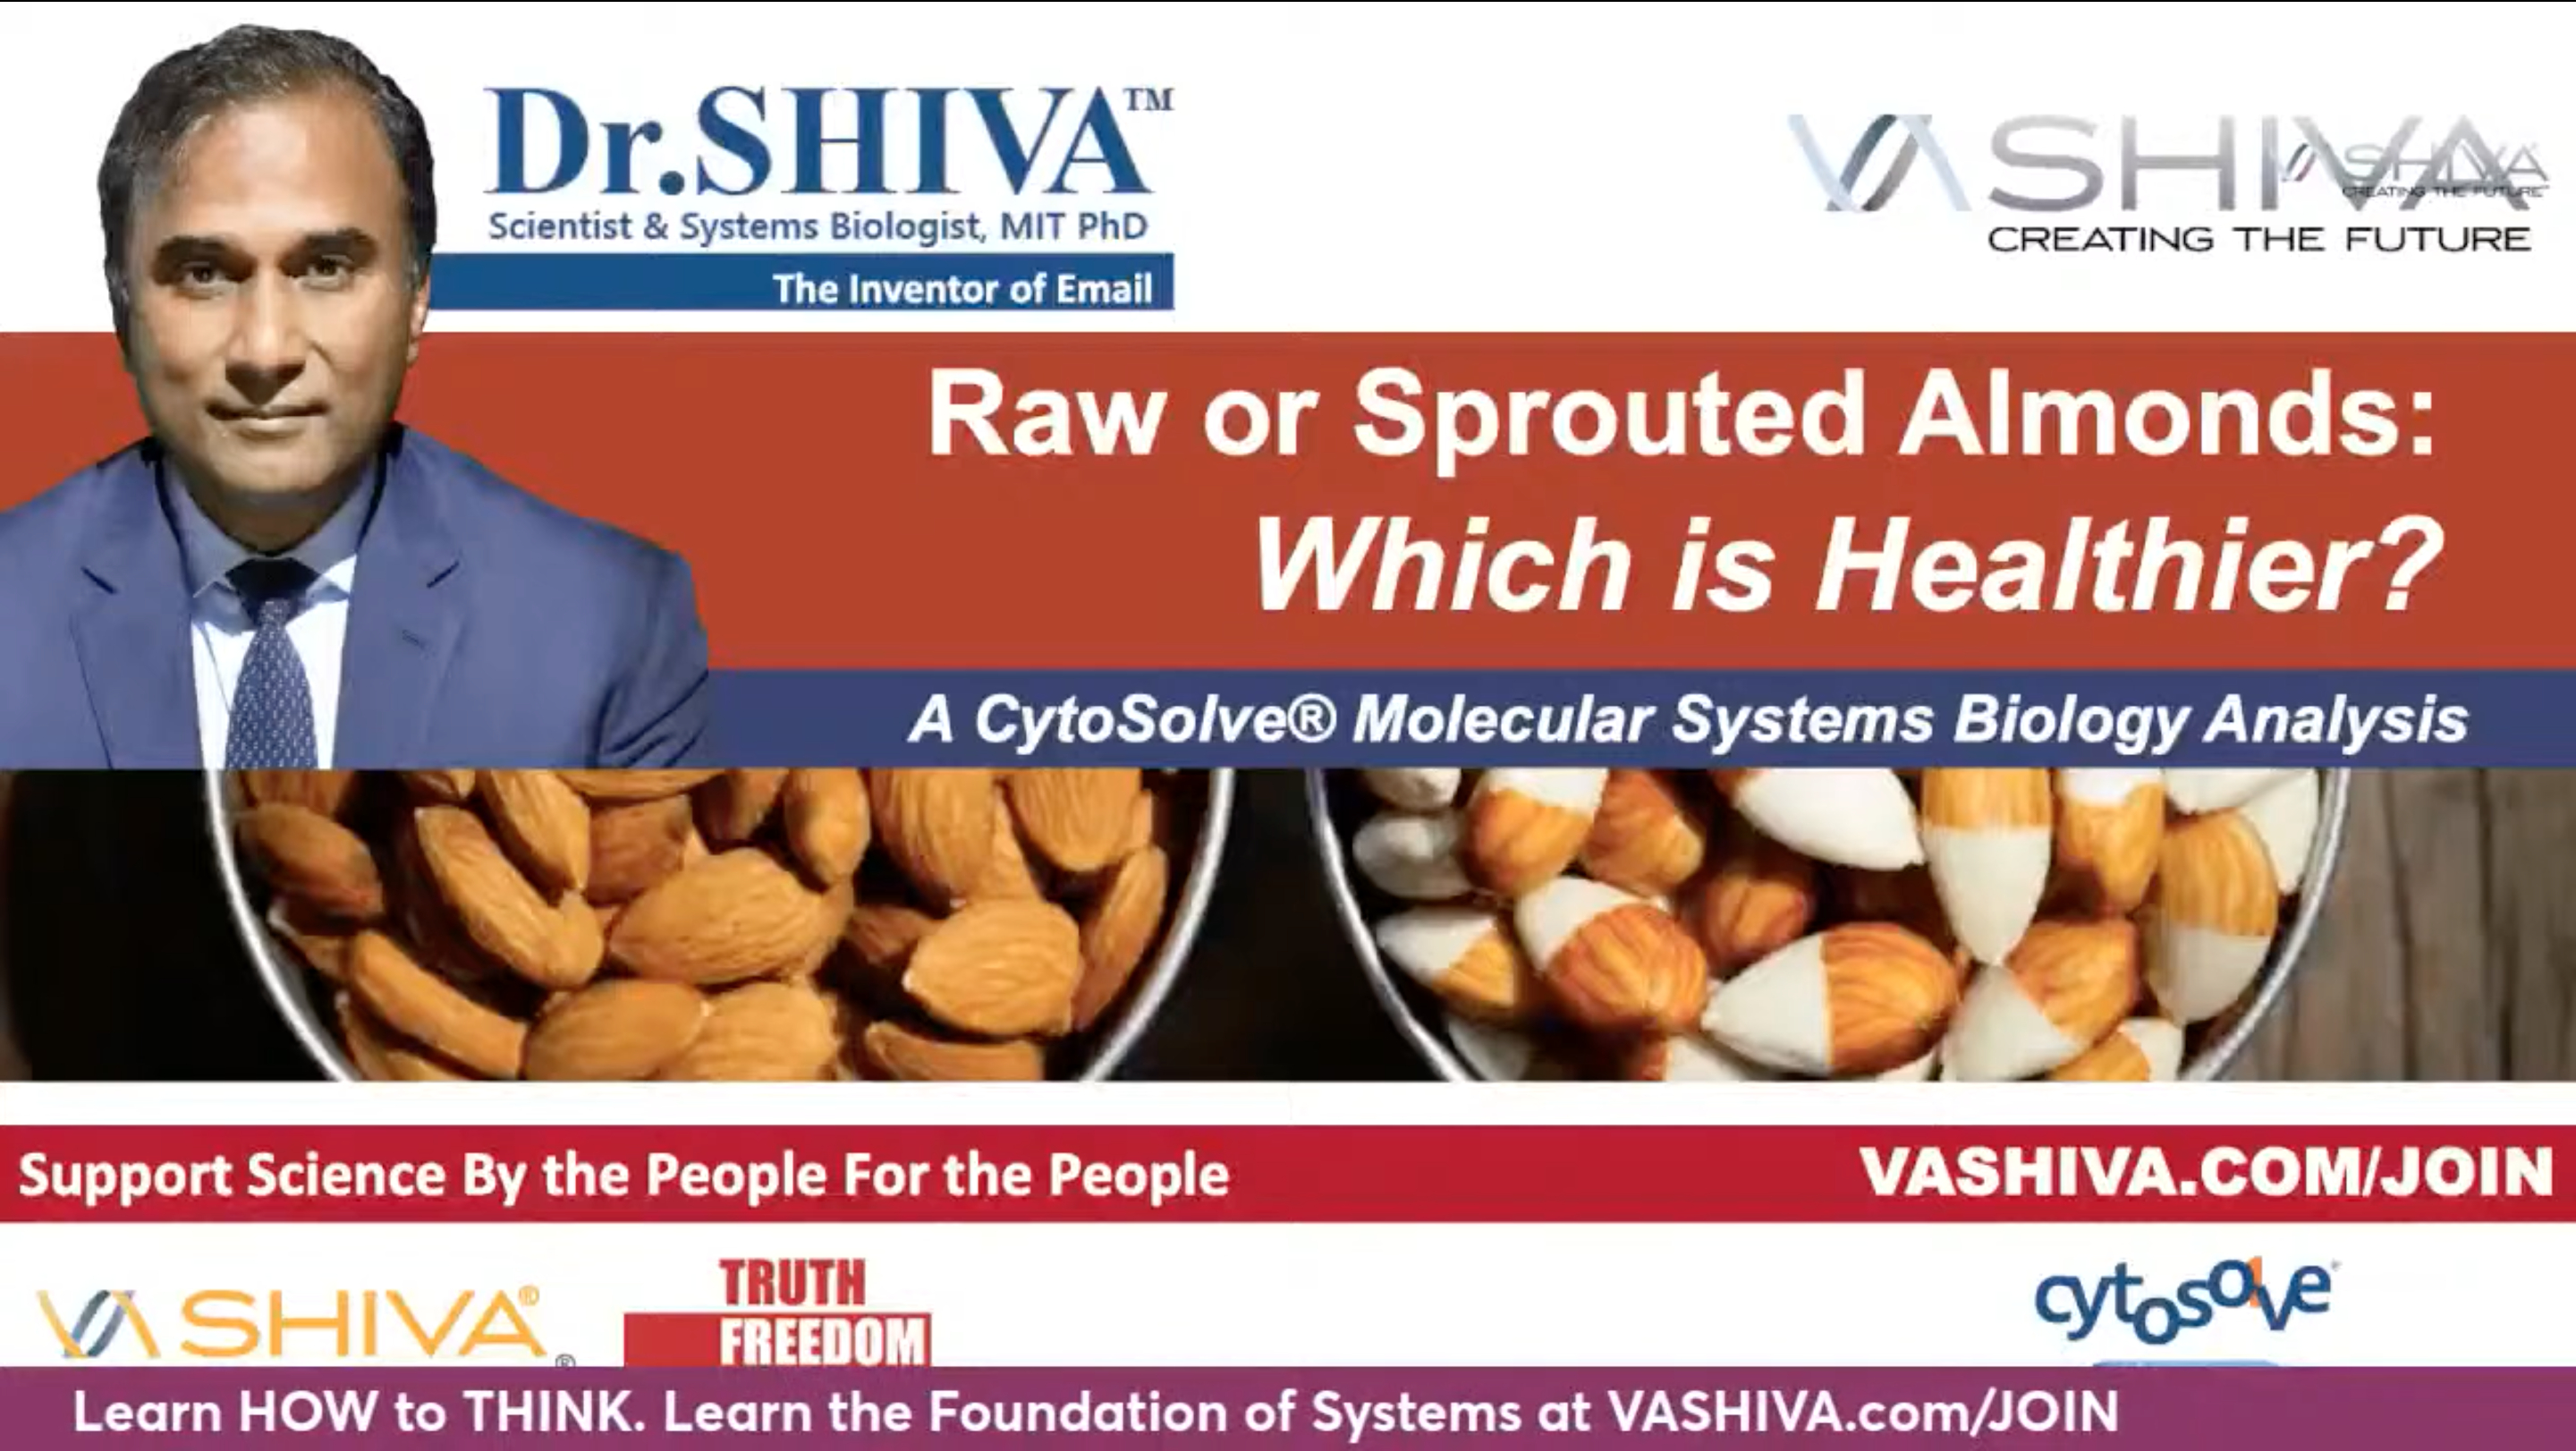 Dr.SHIVA LIVE: RAW or SPROUTED ALMONDS - Which is Healthier?